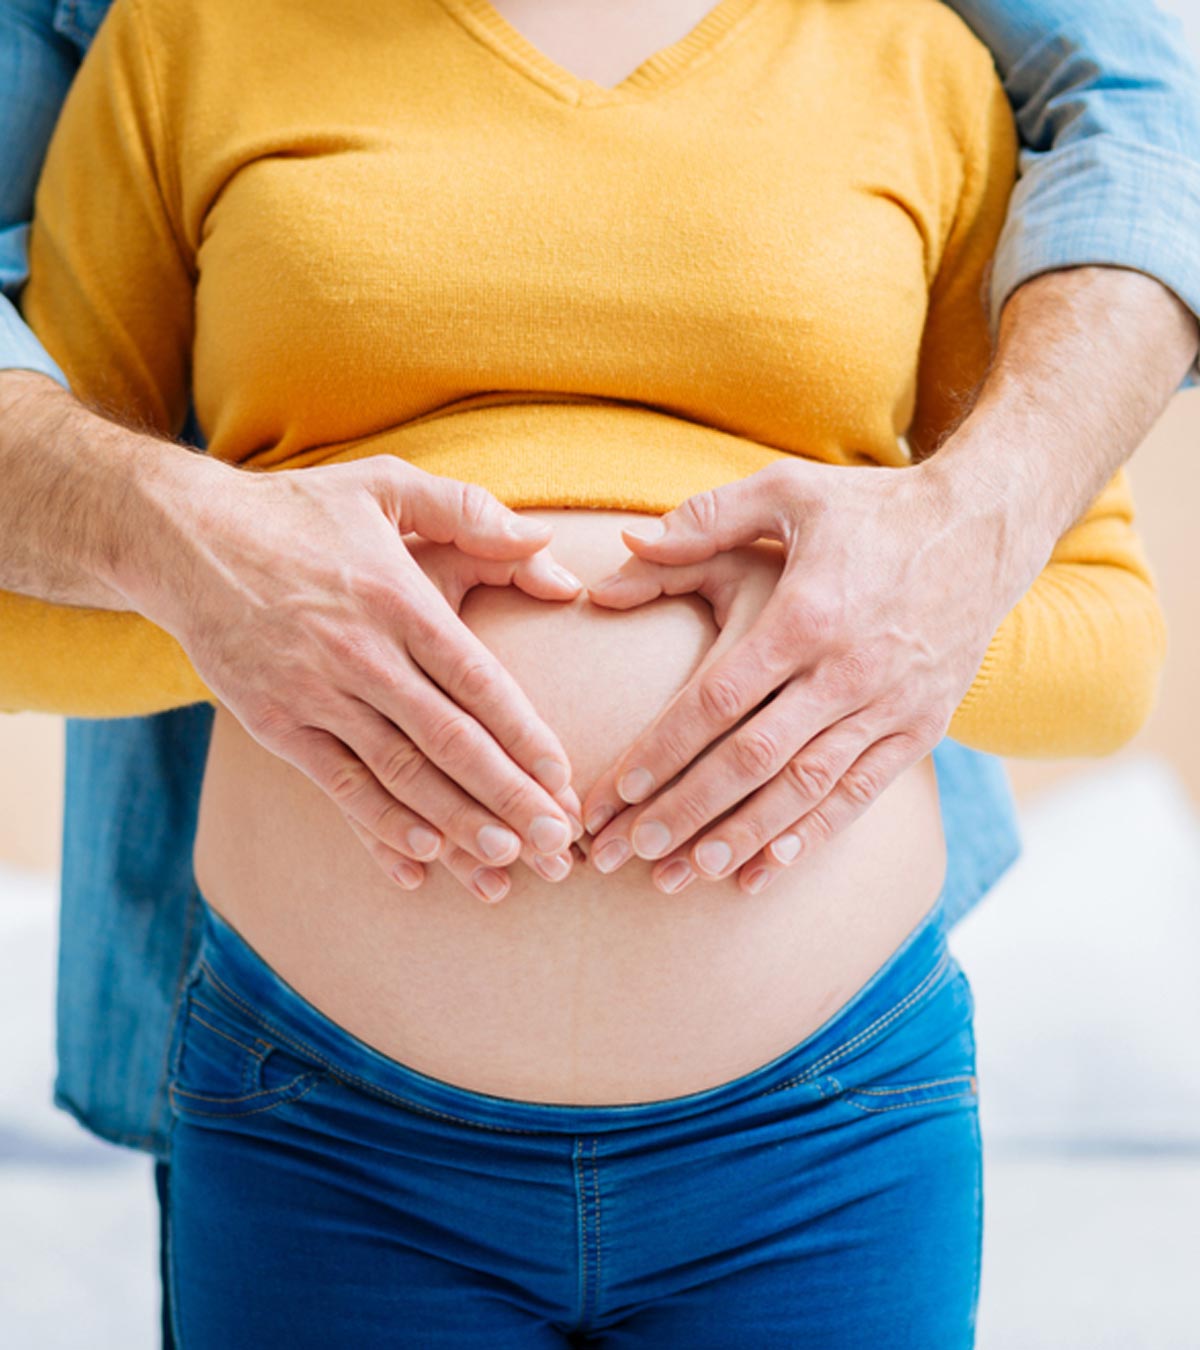 Should You Talk To Your Baby Bump?